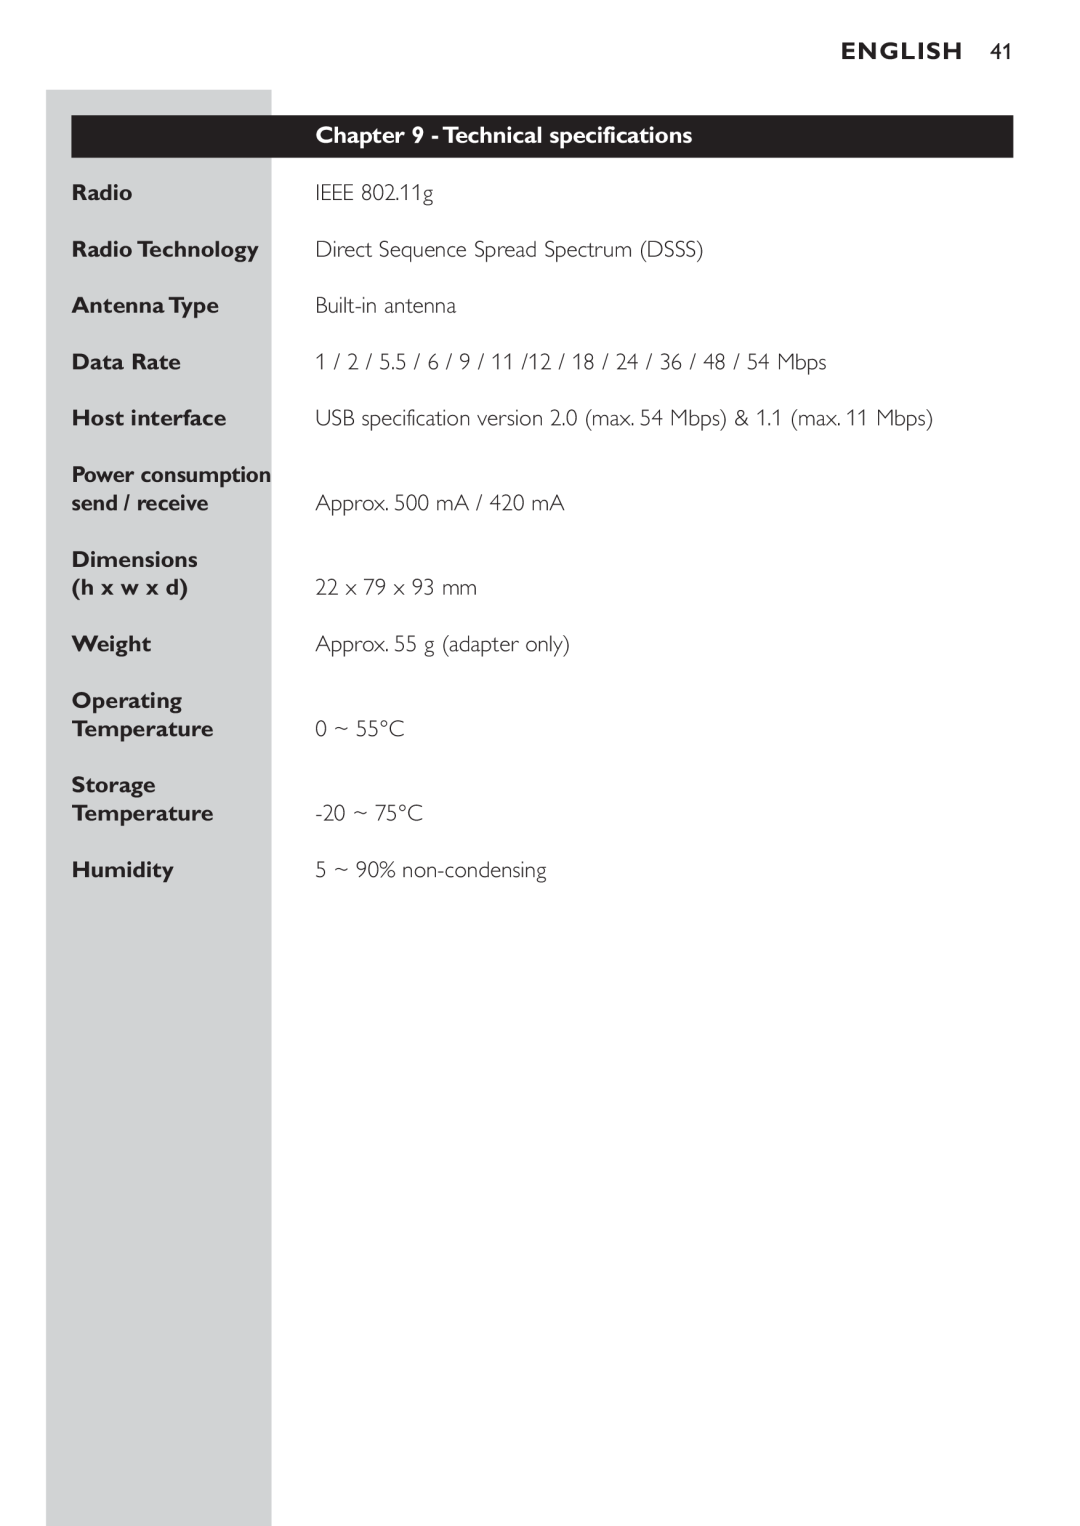 Philips CPWUA054 manual Technical specifications, English, USB specification version 2.0 max. 54 Mbps & 1.1 max. 11 Mbps 